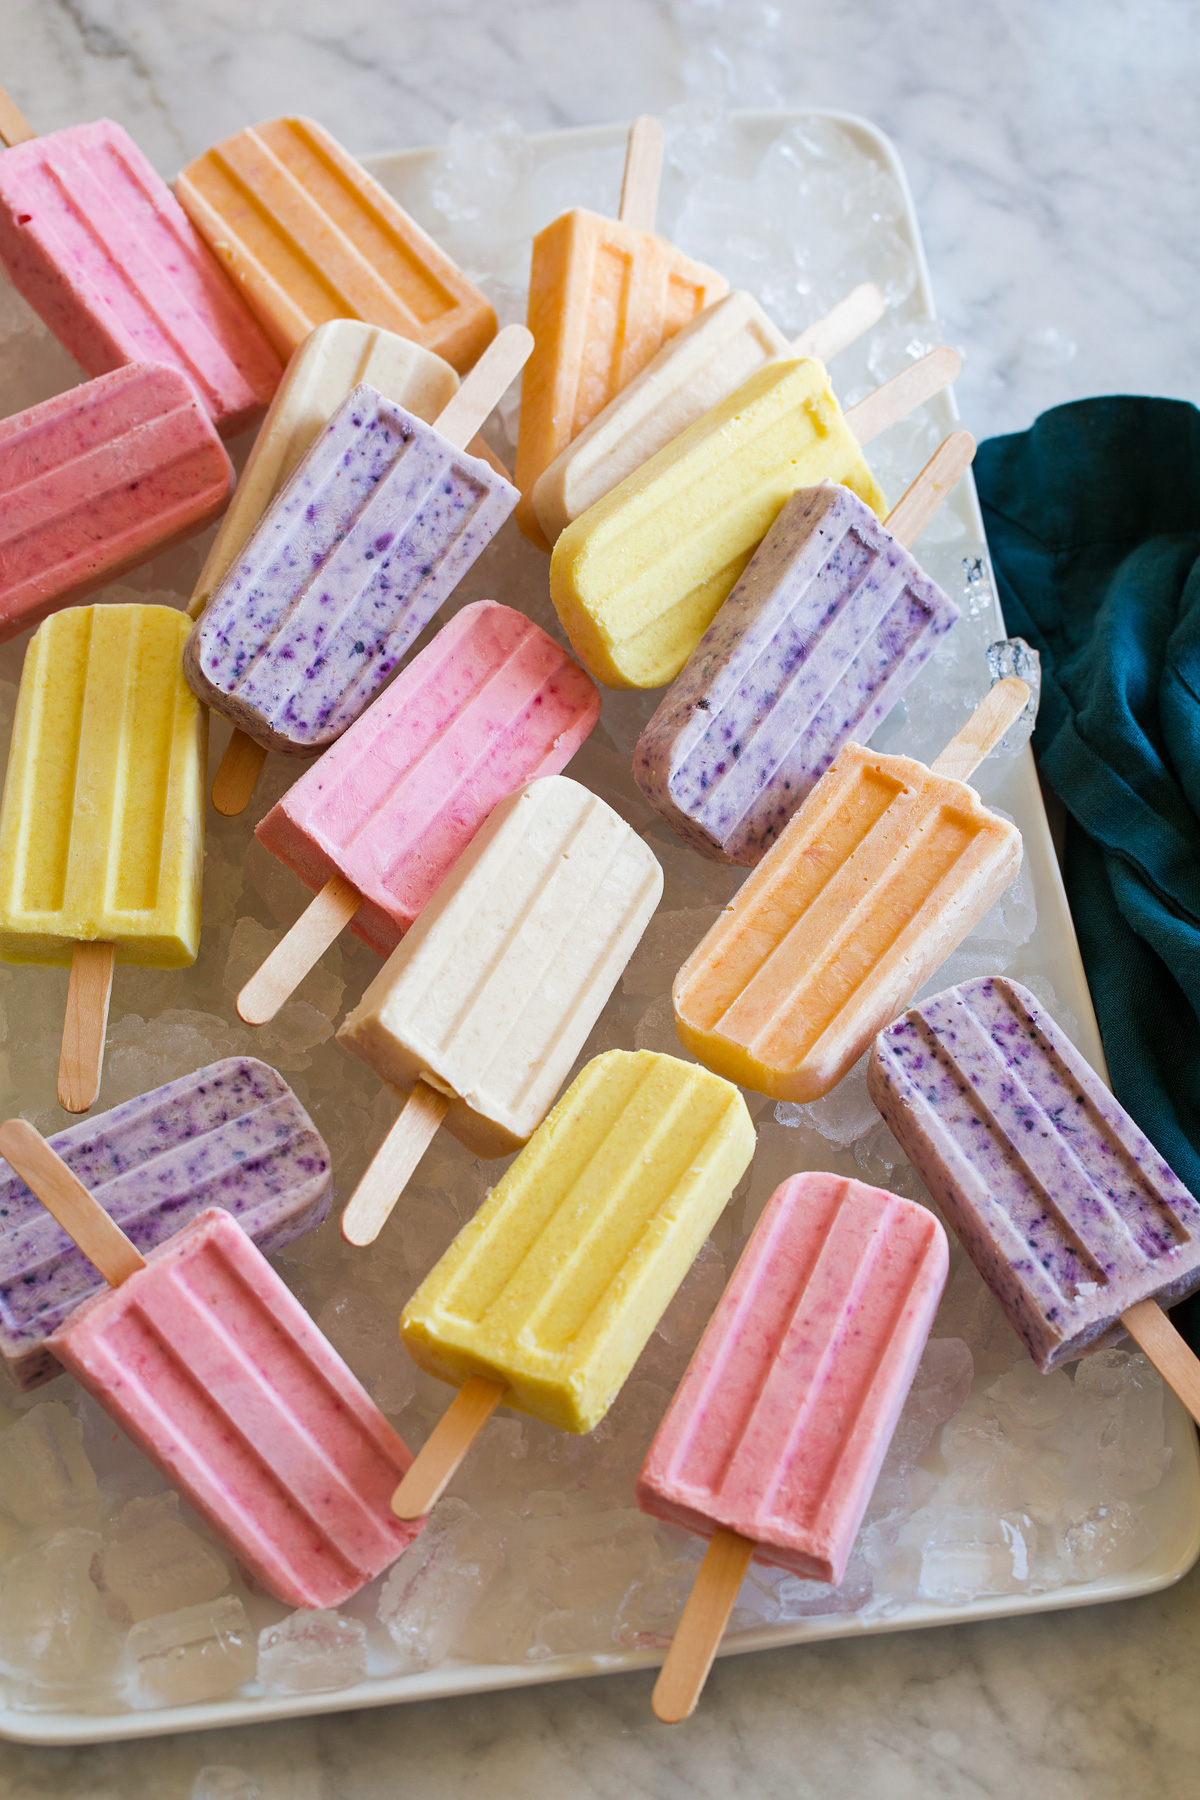 Strawberry, pineapple, banana, peach and blueberry flavored homemade popsicles.